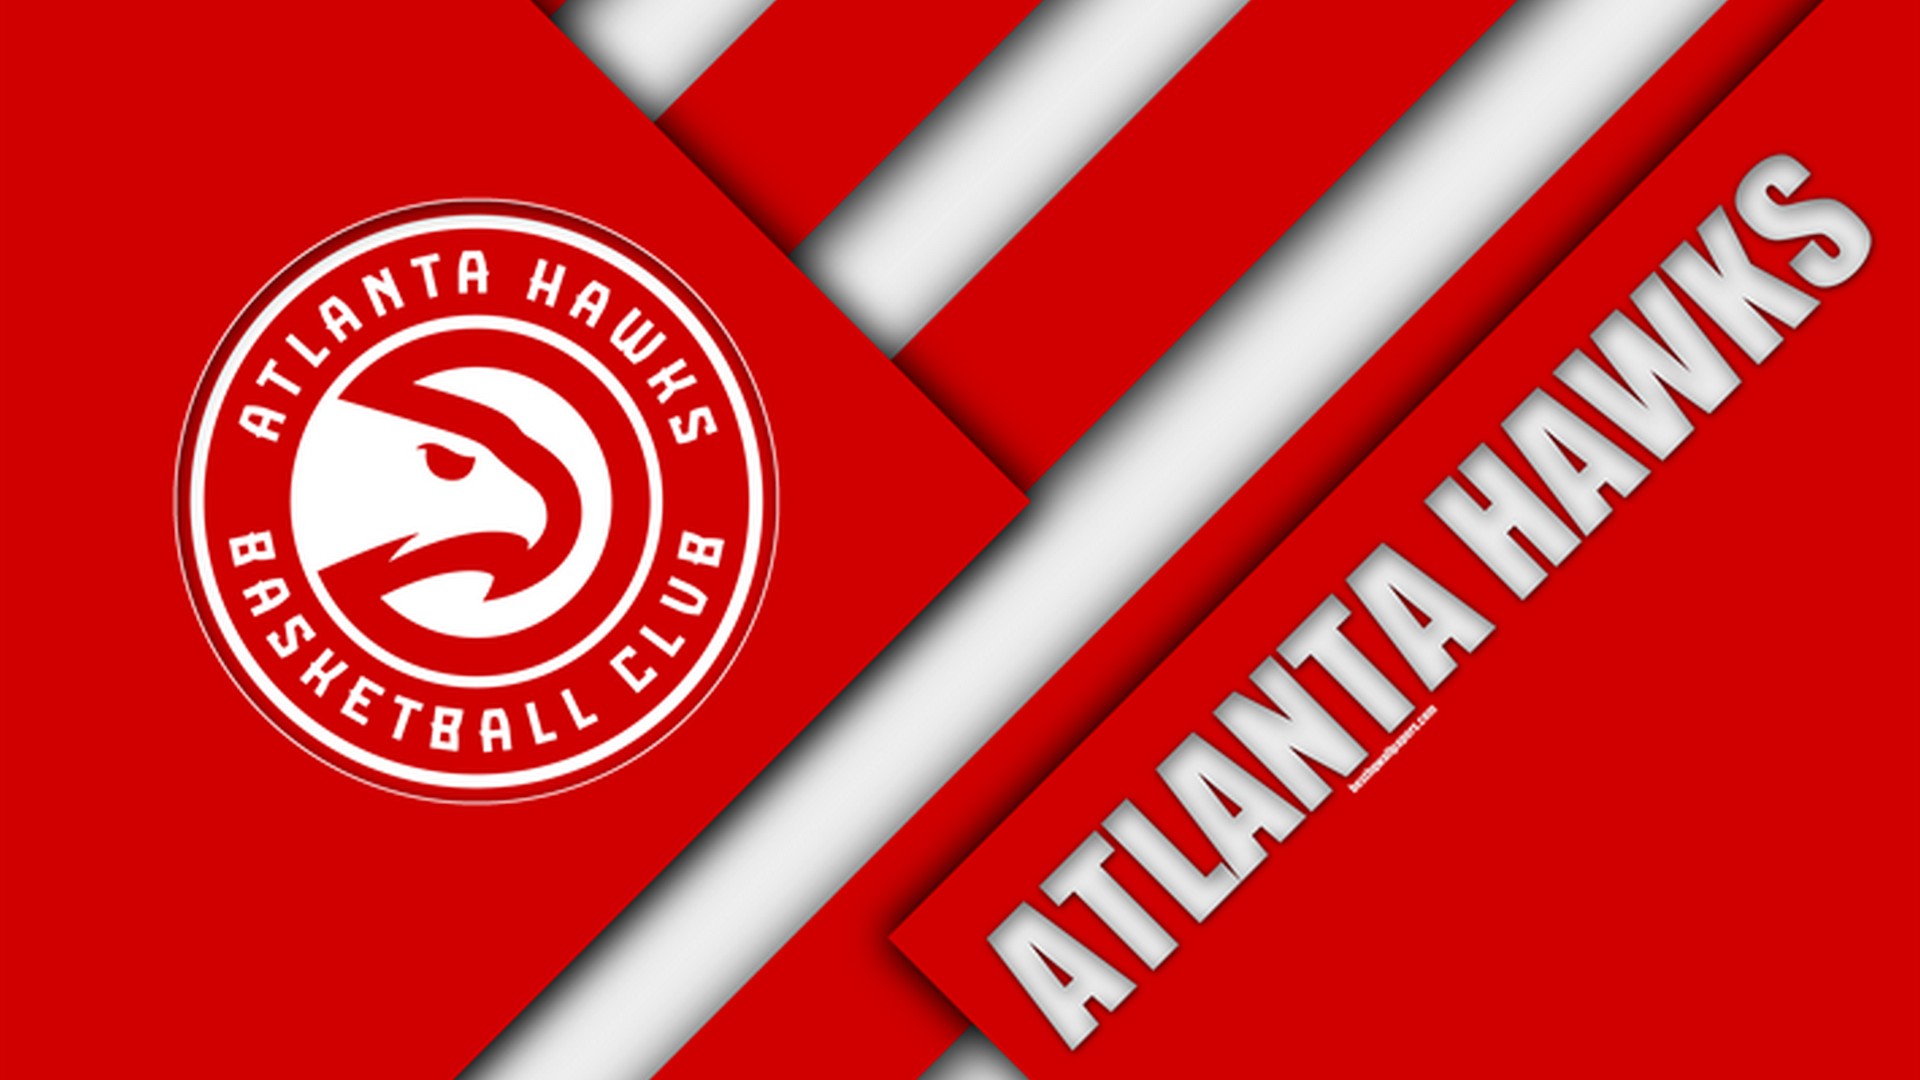 Wallpapers Atlanta Hawks with image dimensions 1920x1080 pixel. You can make this wallpaper for your Desktop Computer Backgrounds, Windows or Mac Screensavers, iPhone Lock screen, Tablet or Android and another Mobile Phone device